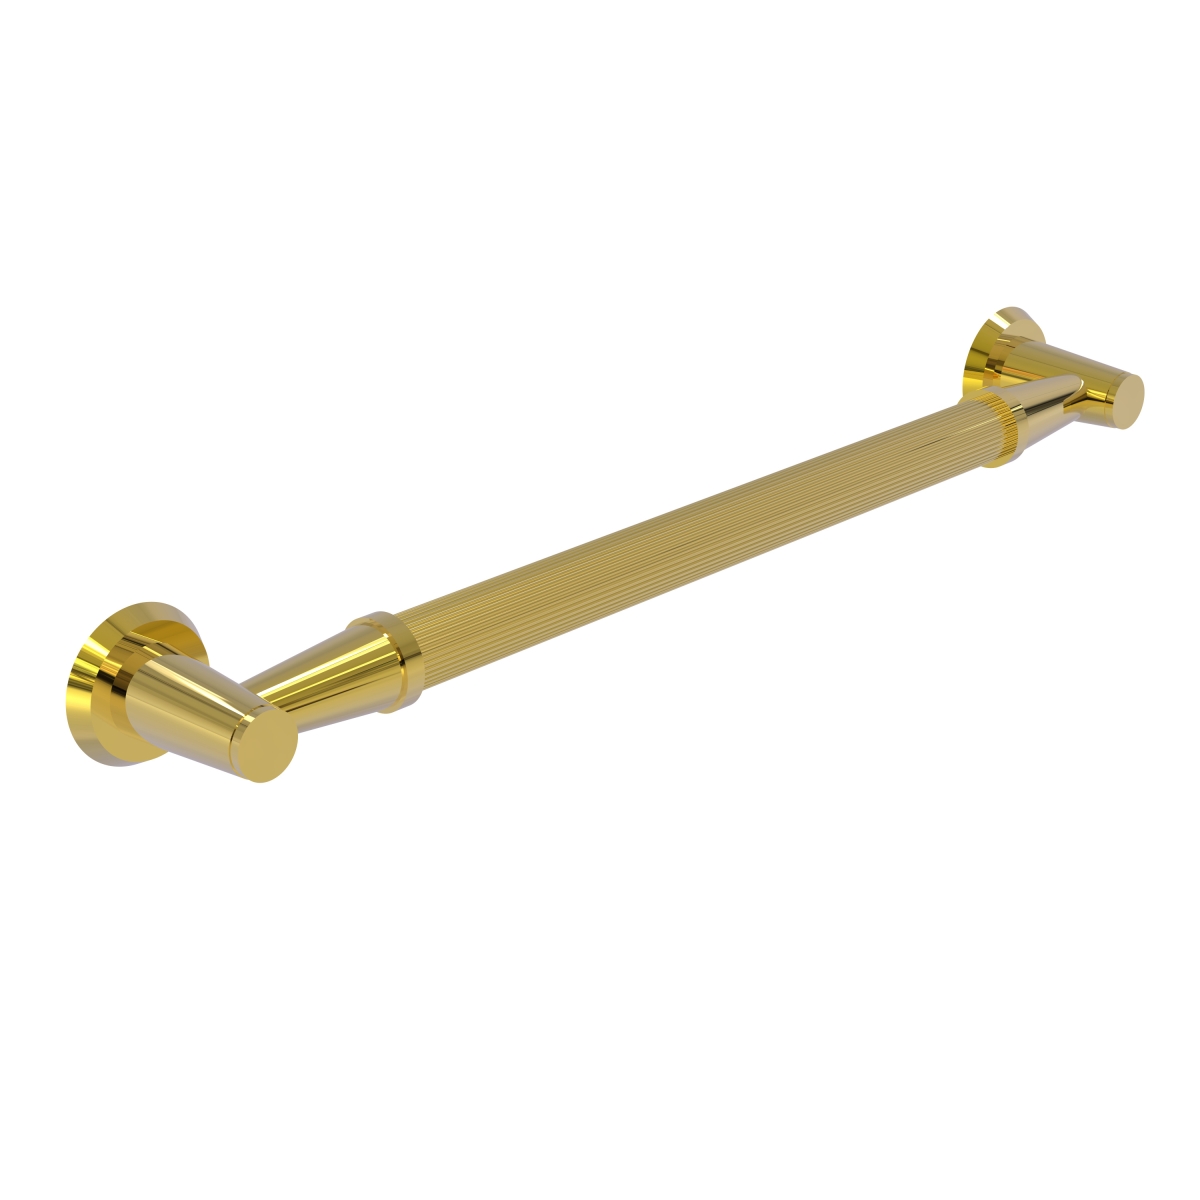 Picture of Allied Brass MD-GRR-32-PB 32 in. Reeded Grab Bar, Polished Brass - 3.5 x 34 x 32 in.